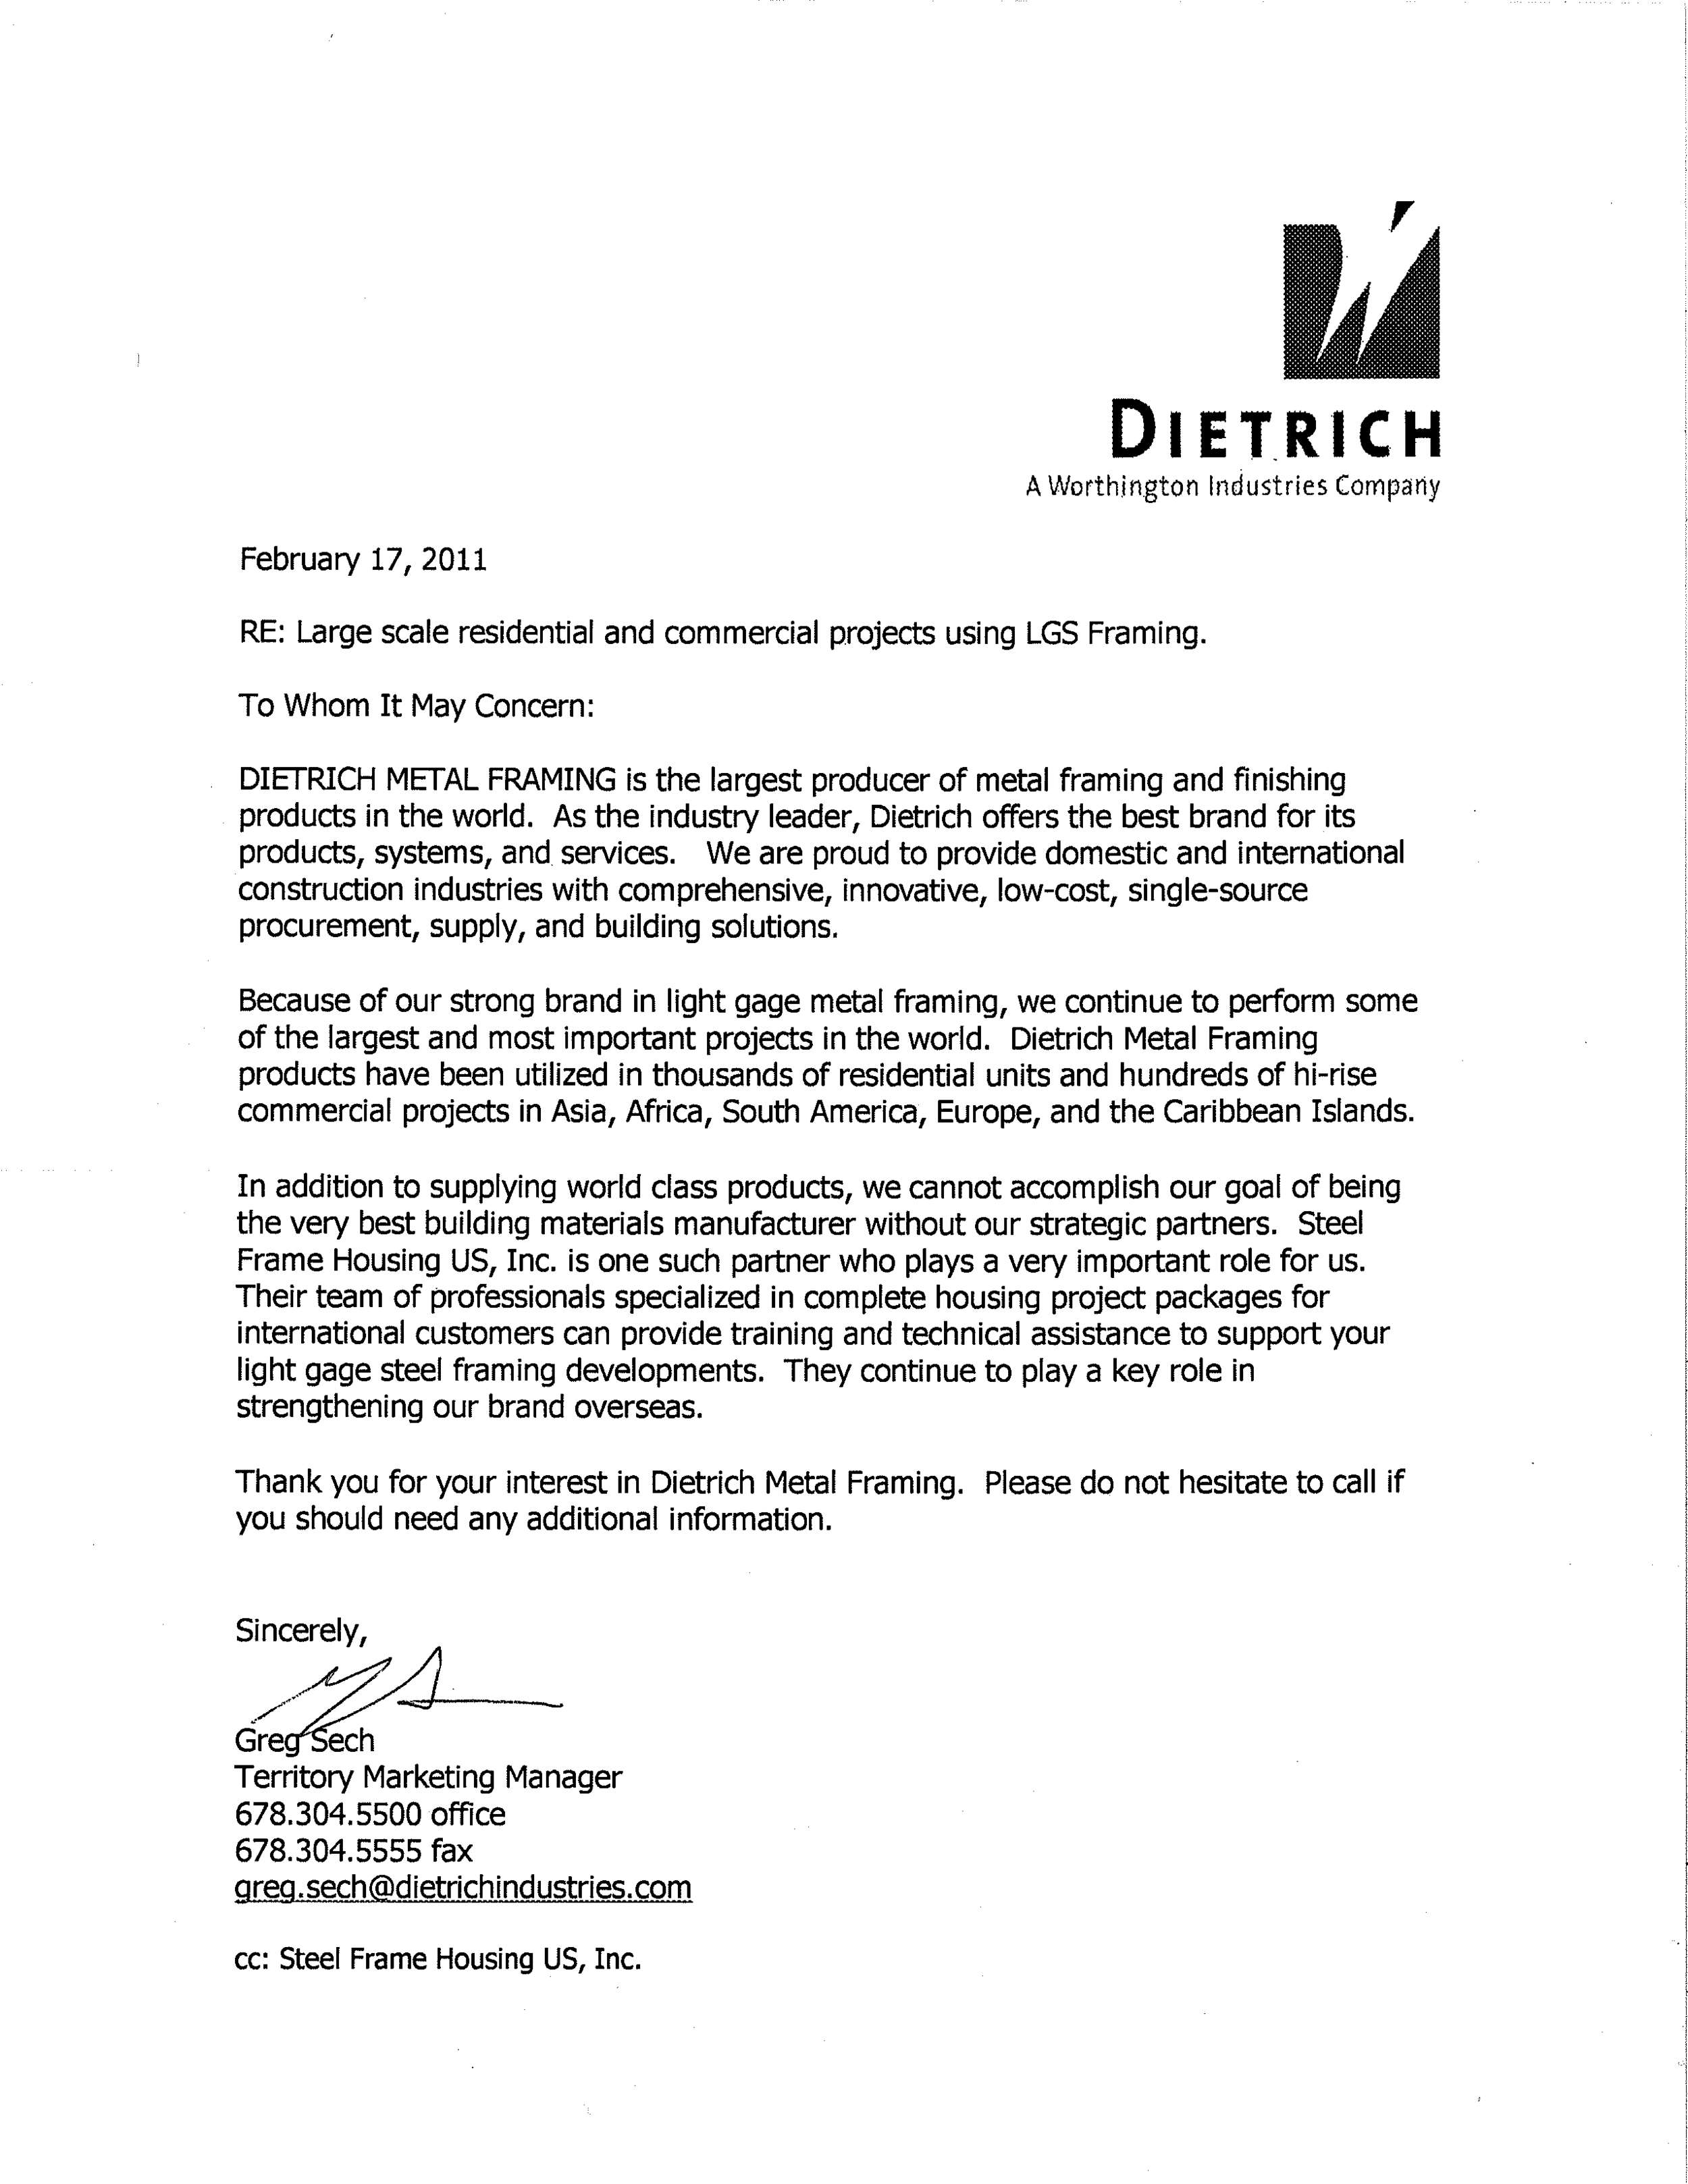 DIETRICH LETTER BY TERRITORY MARKETING DIV..png